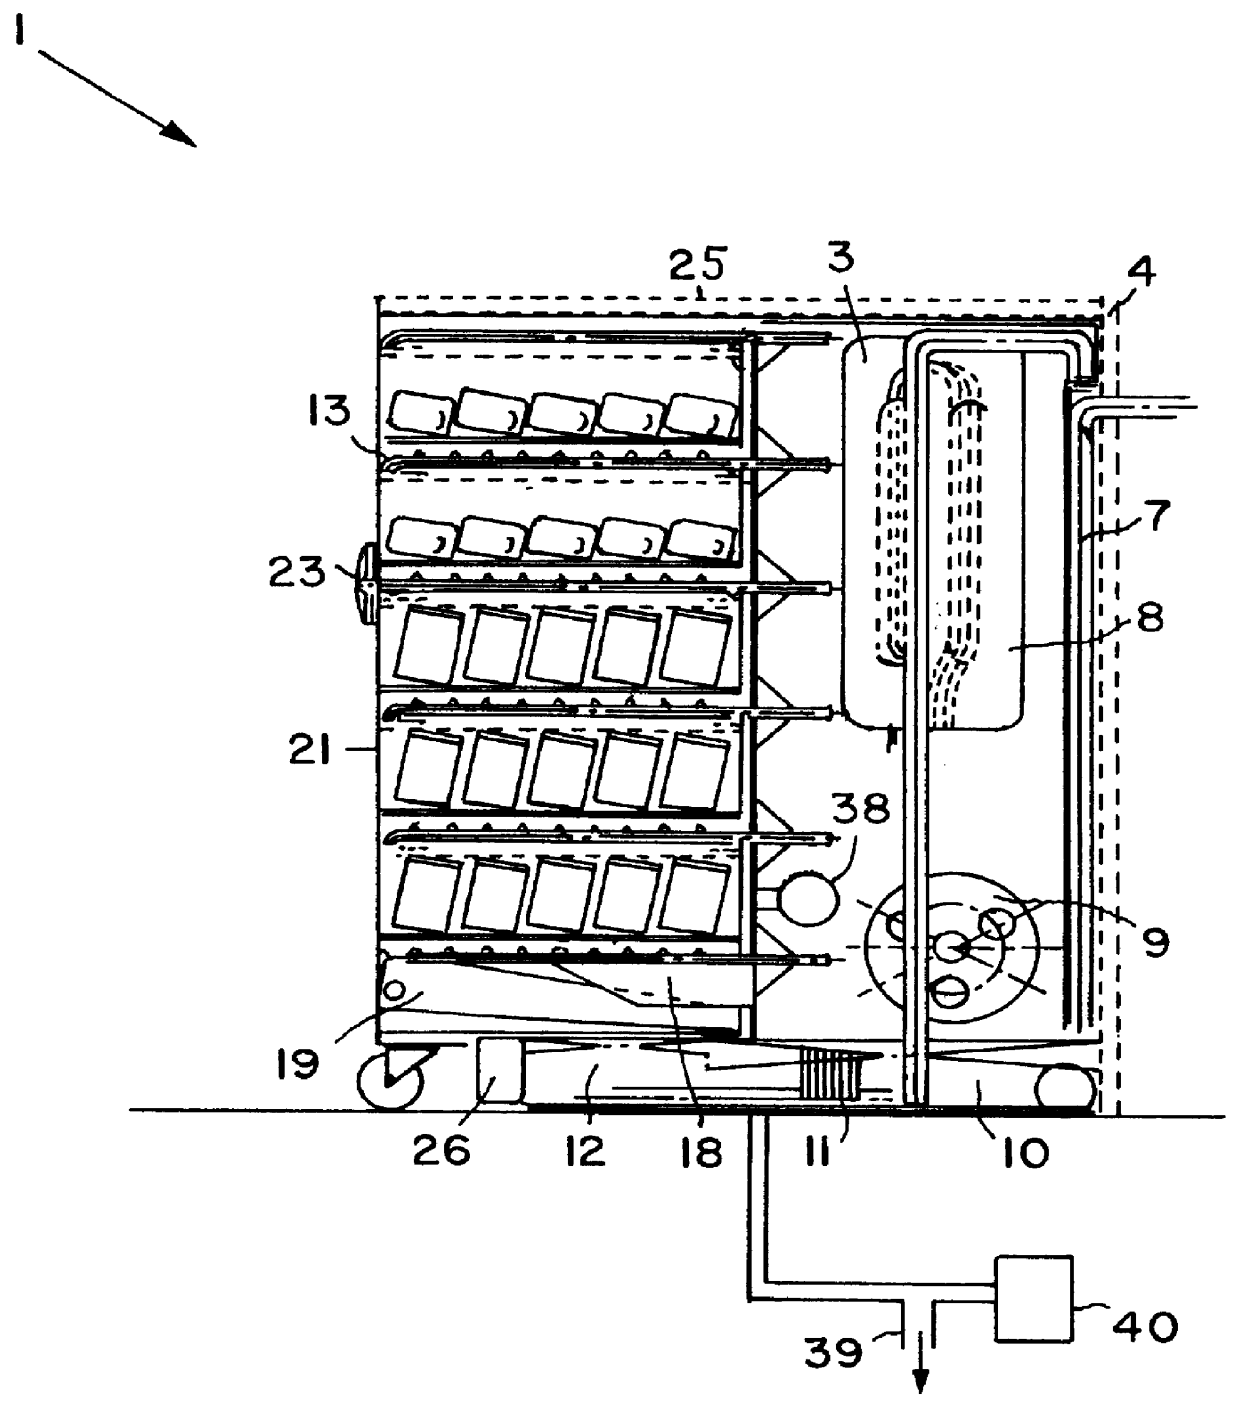 Apparatus for washing dishes and cutlery especially in a food service system in an aircraft